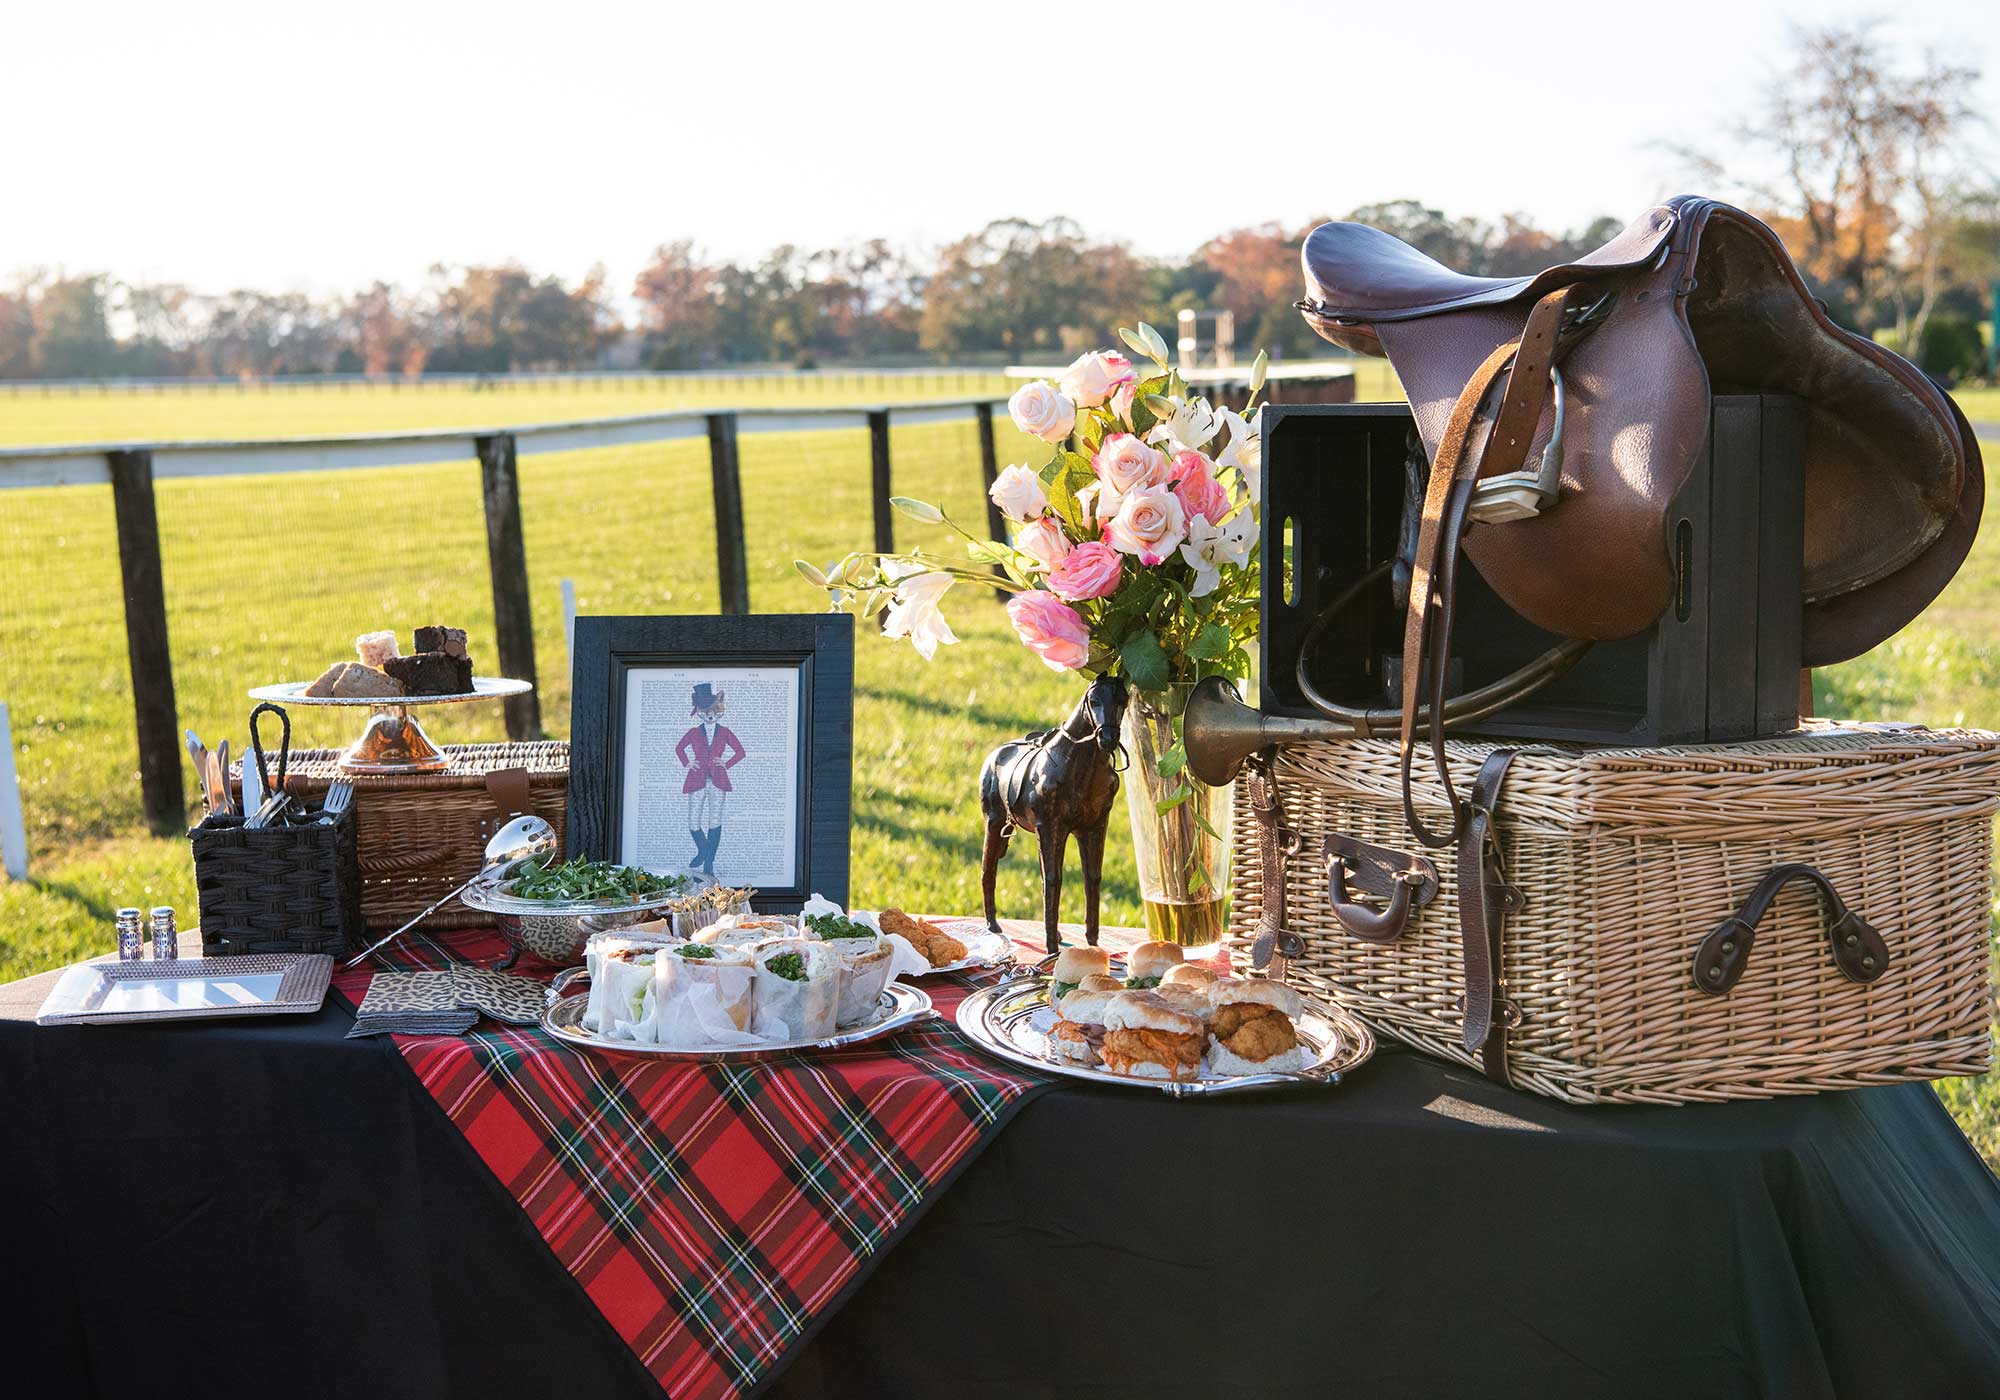 Foxfield Races, Image by © R.L. Johnson for Wine & Country Life